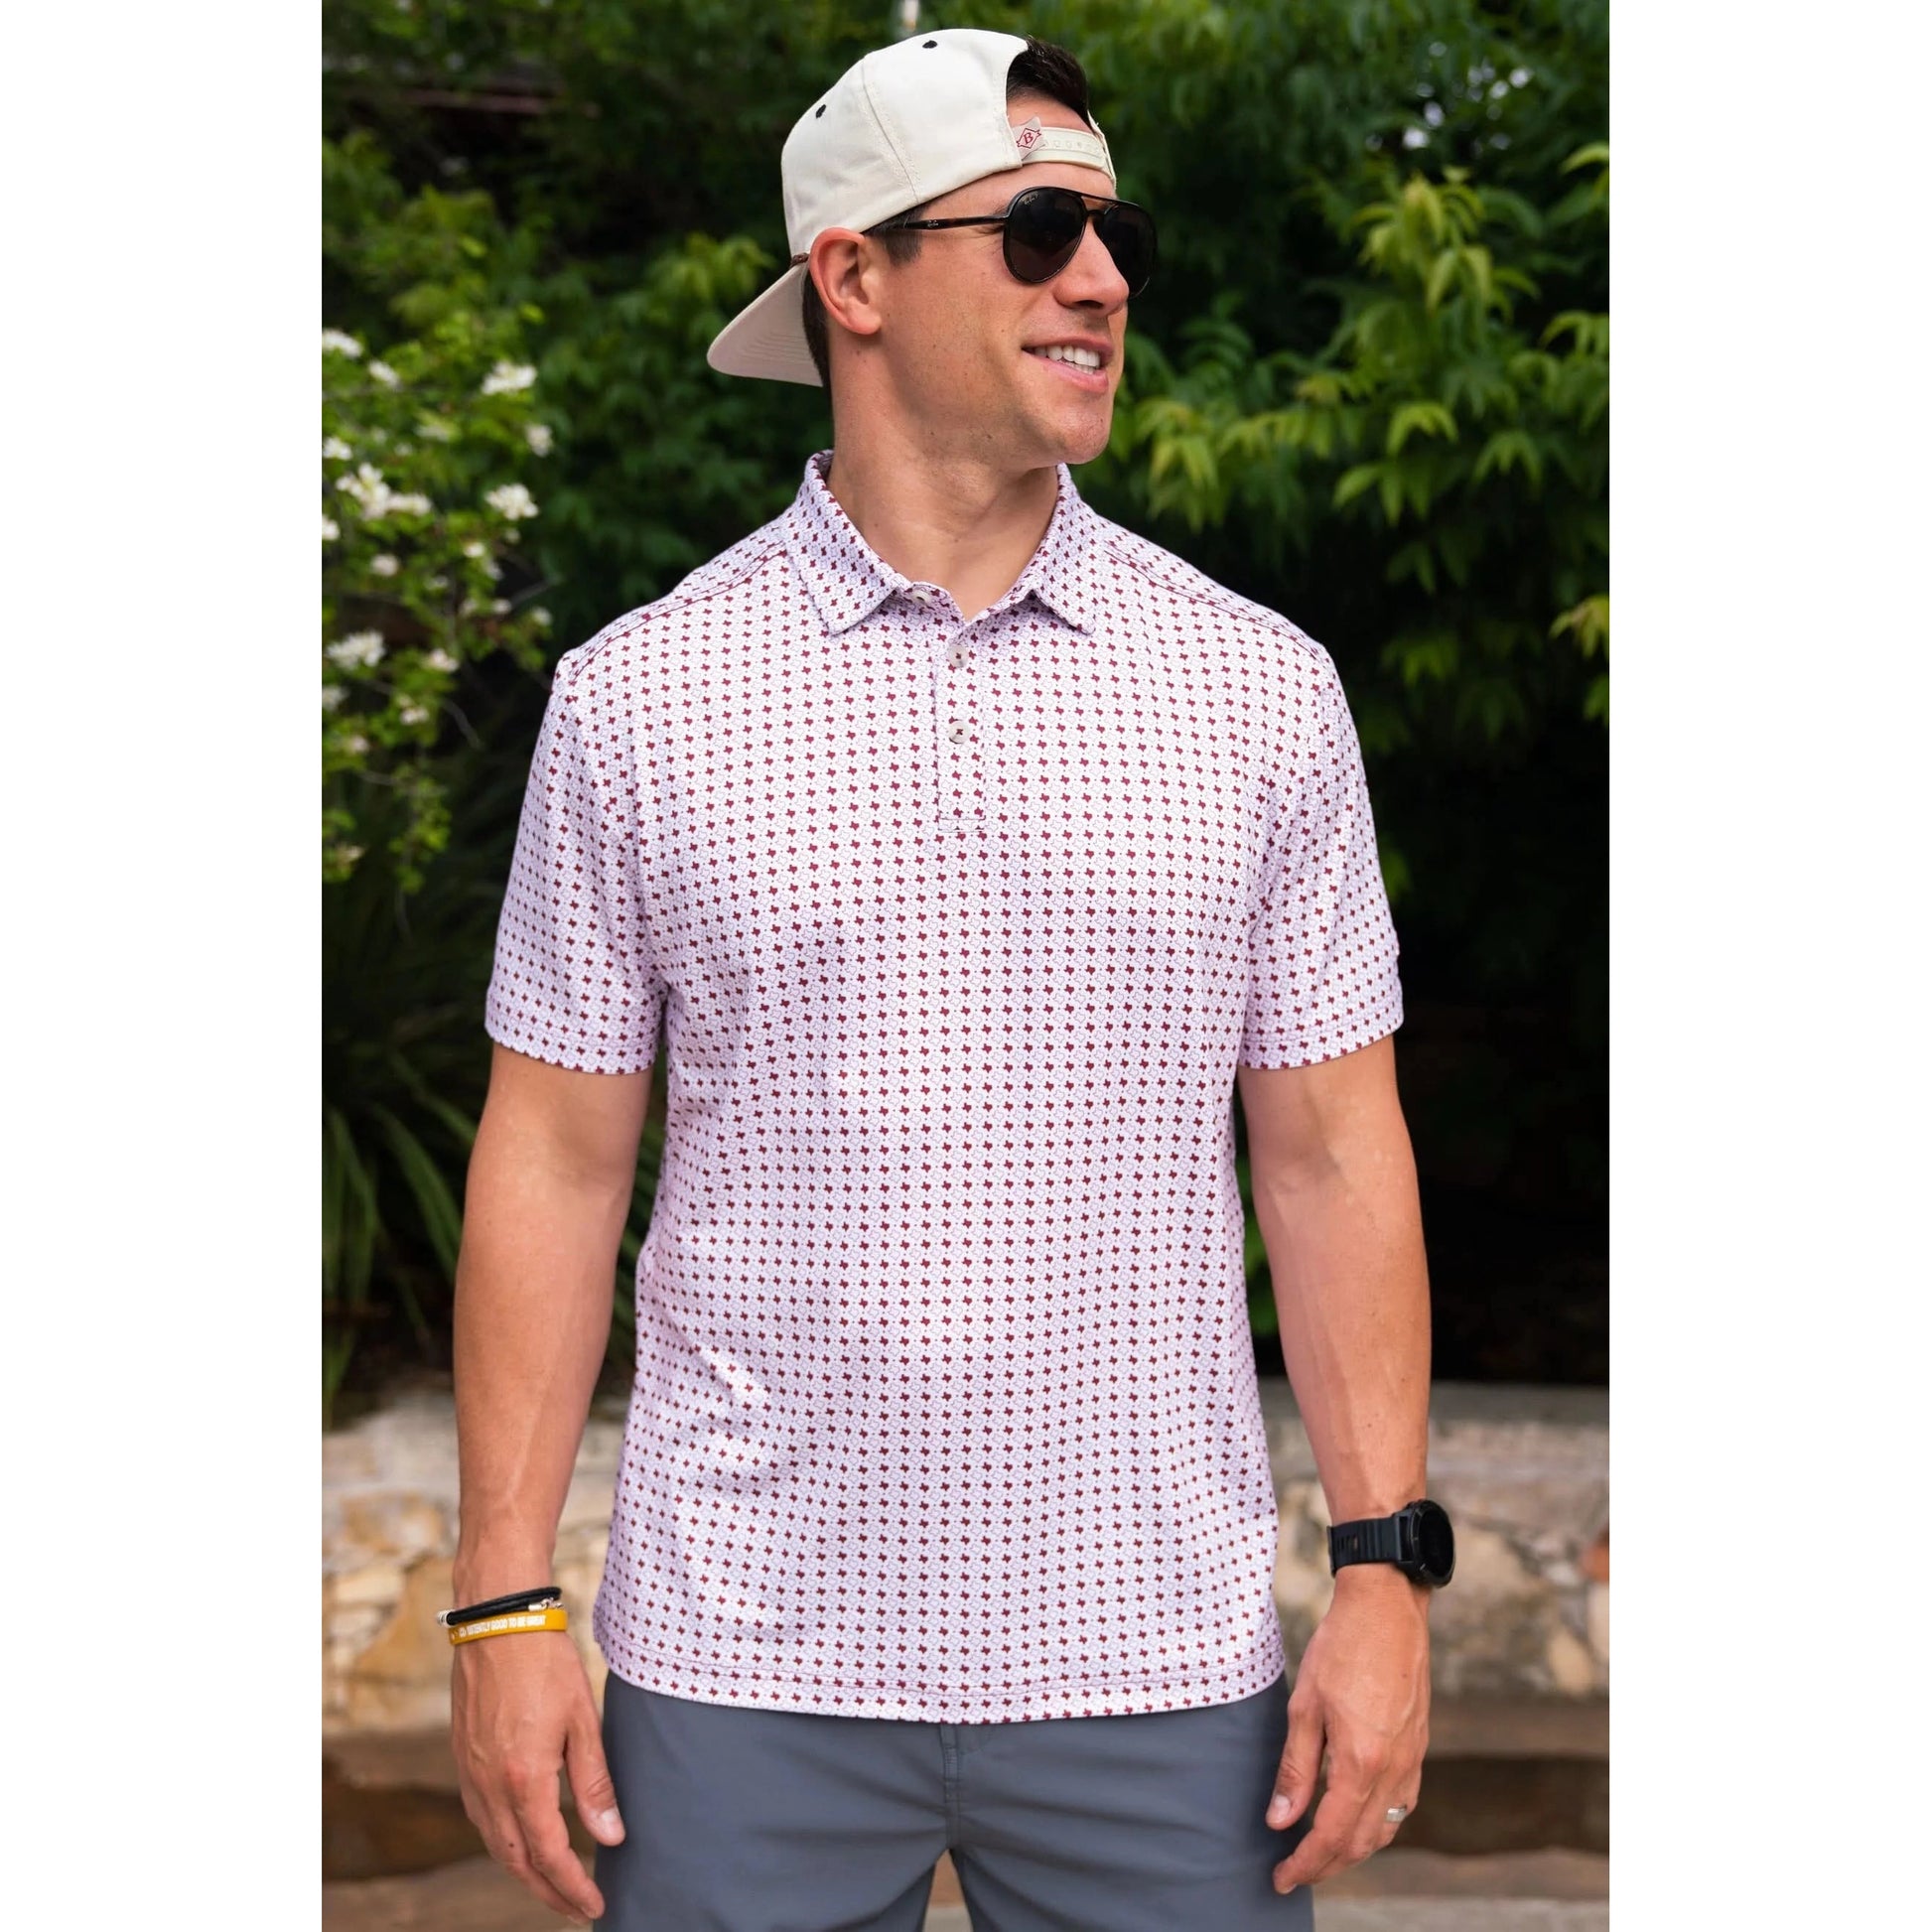 Burlebo Performance Polo in Texas White and Maroon